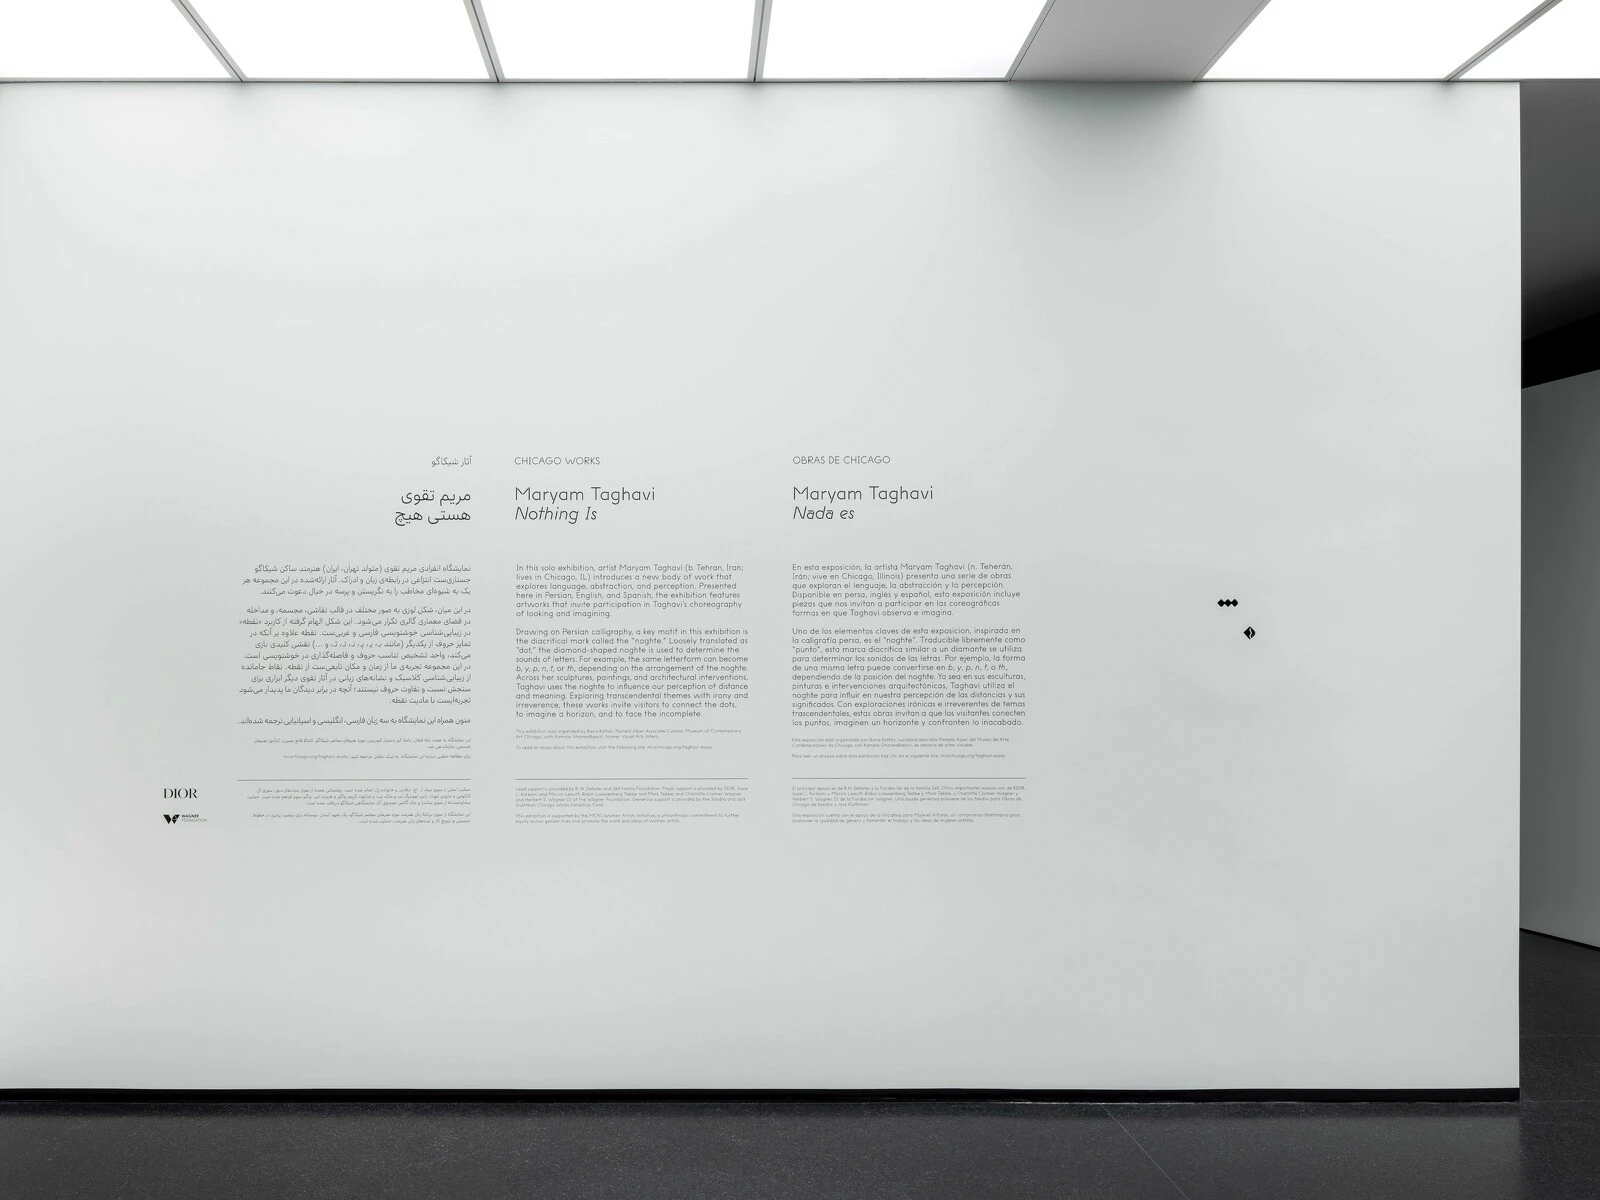 Title and introductory didactic text on white gallery wall.